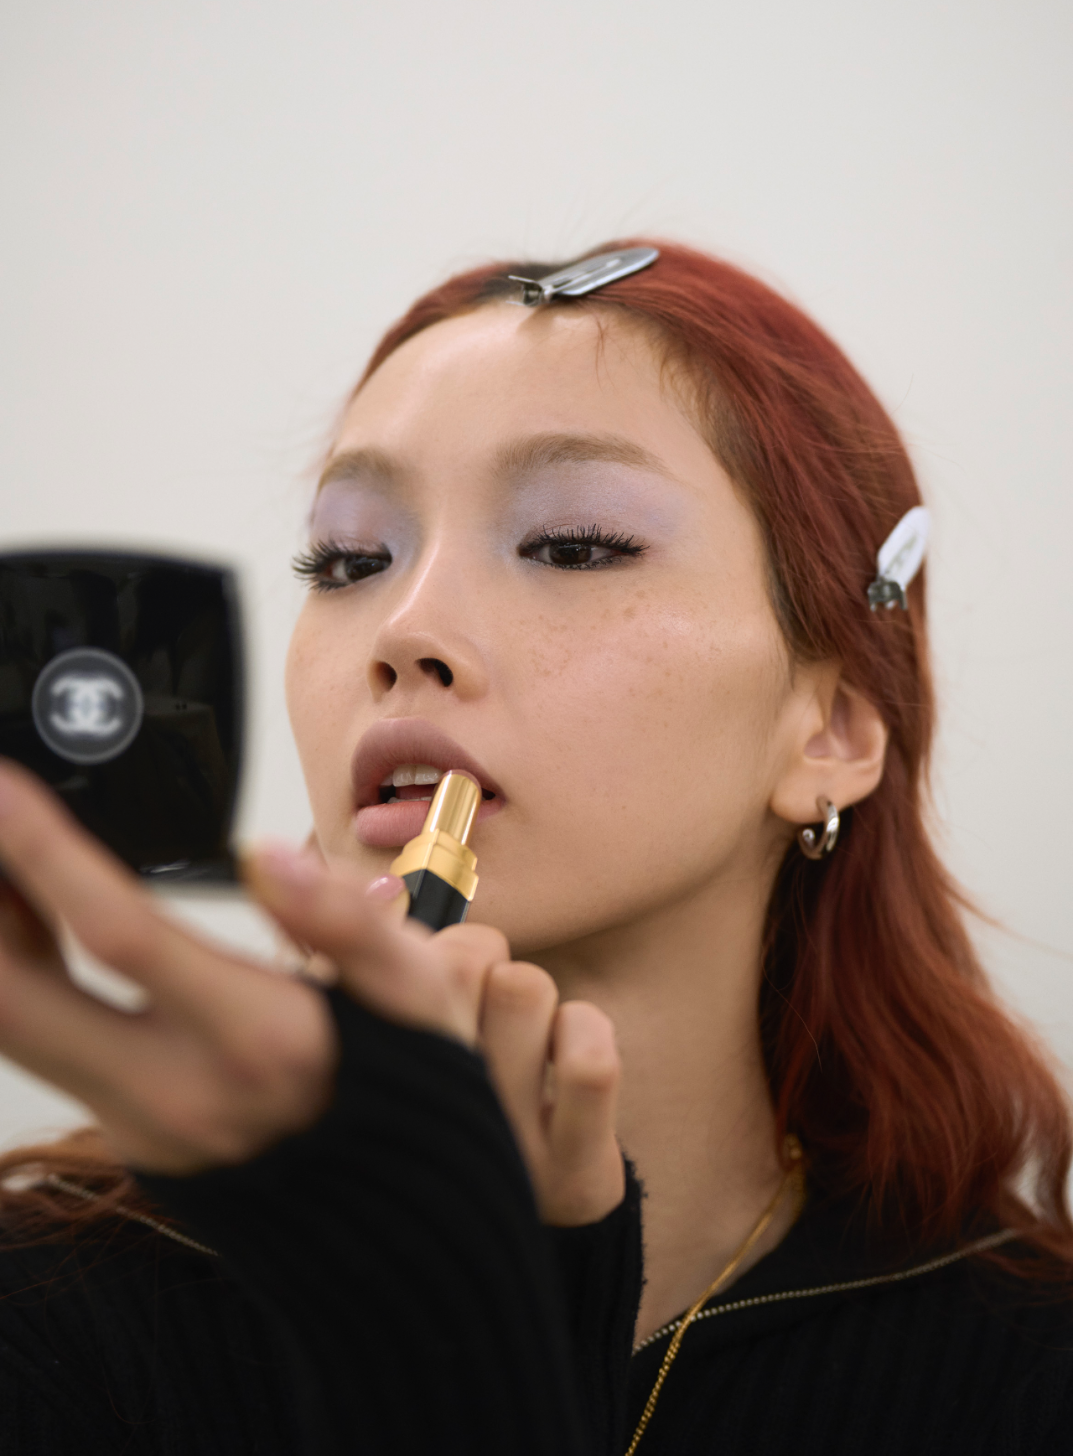 5 CHANEL Beauty Buys Our Editor Won't Live Without